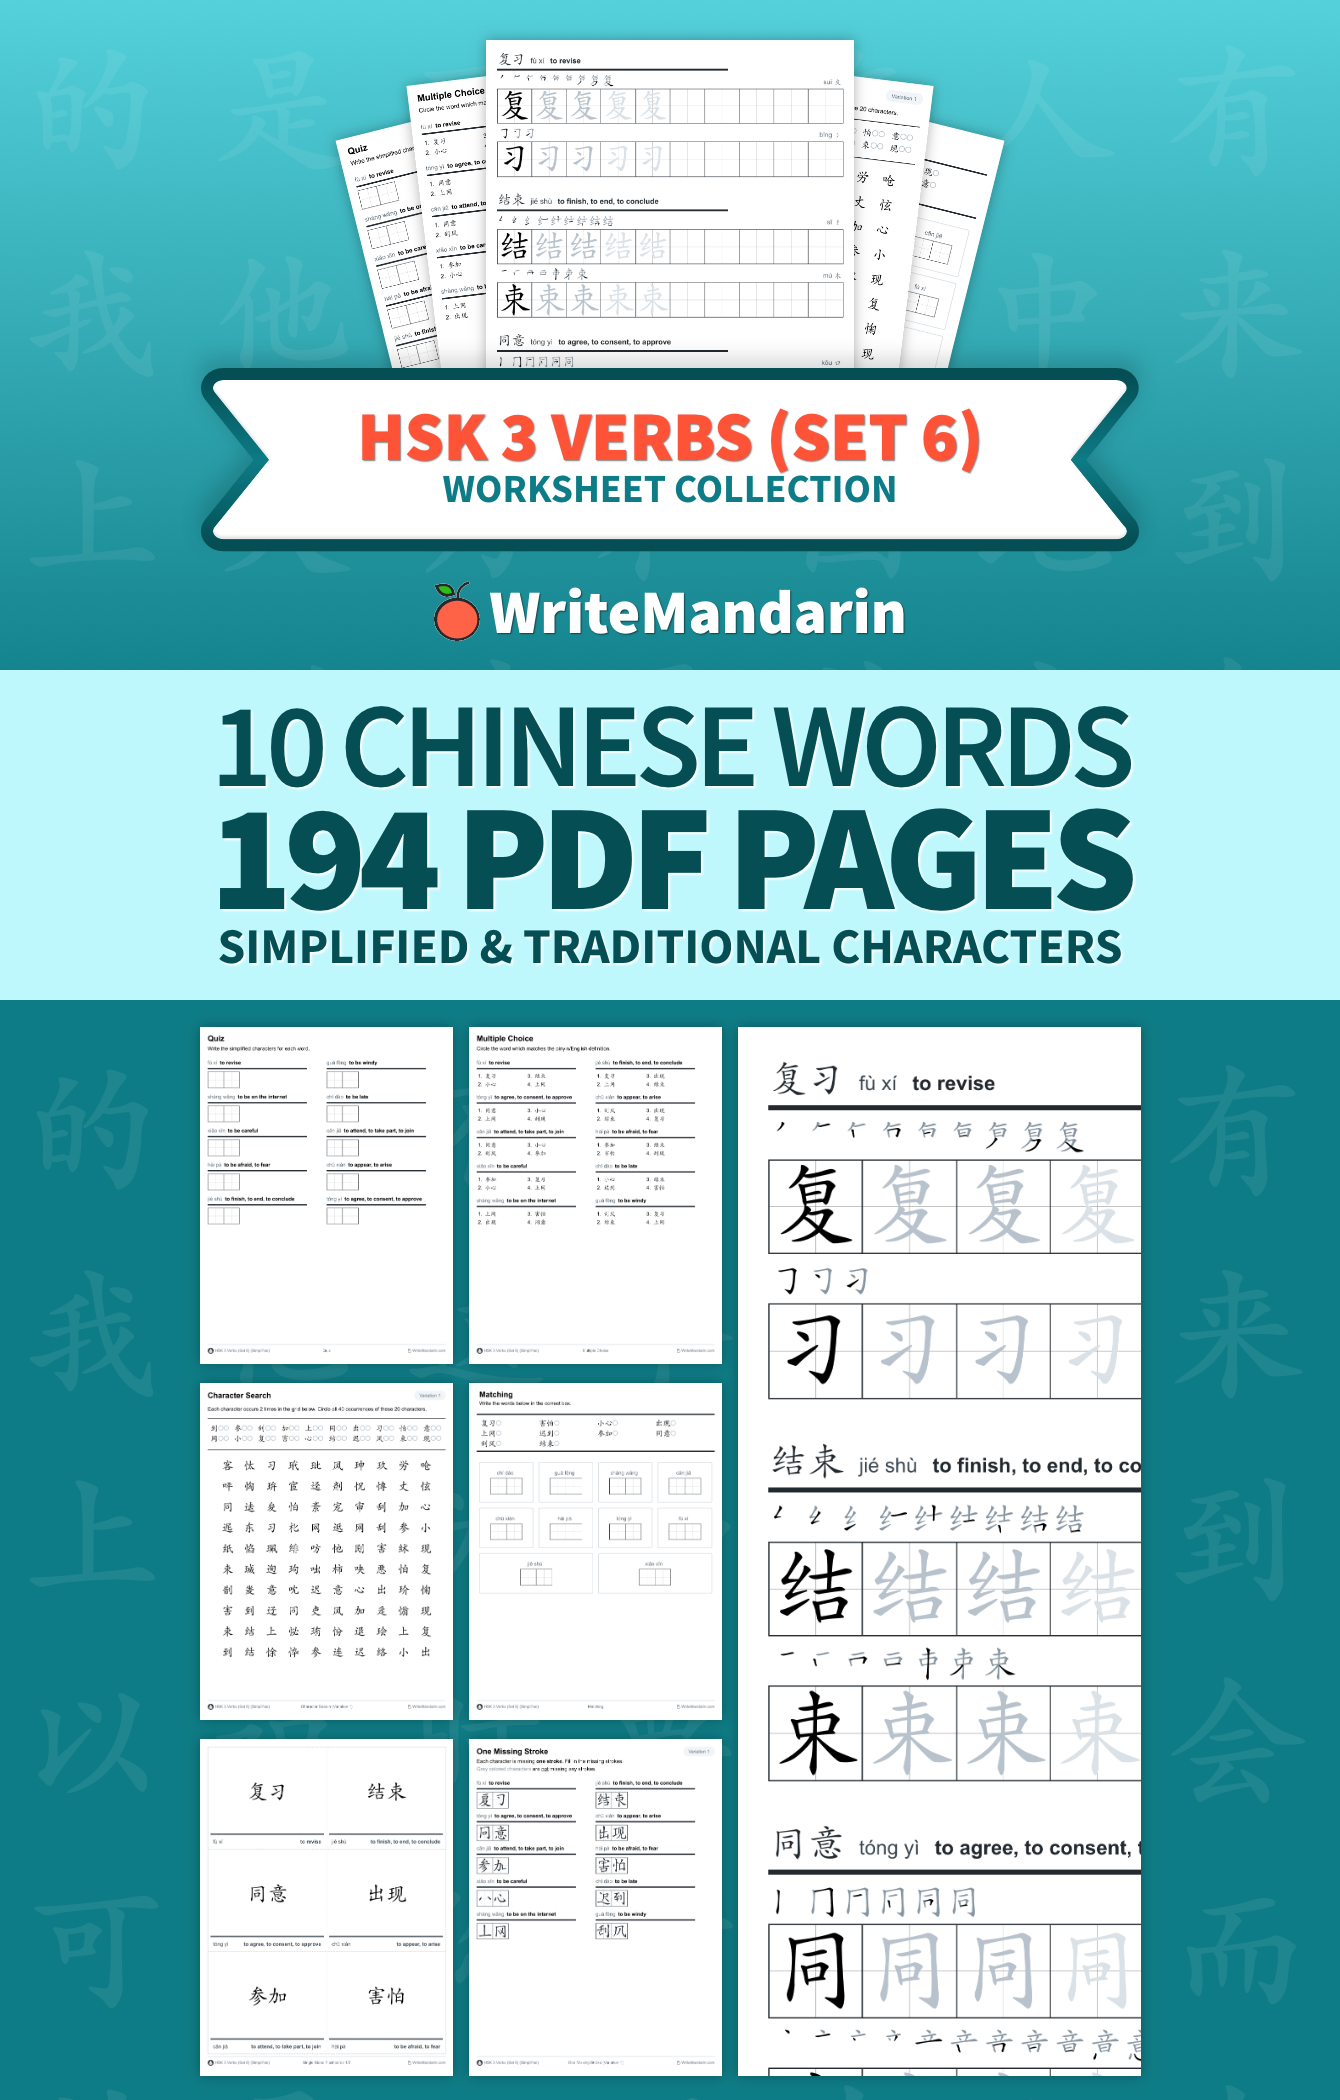 Preview image of HSK 3 Verbs (Set 6) worksheet collection